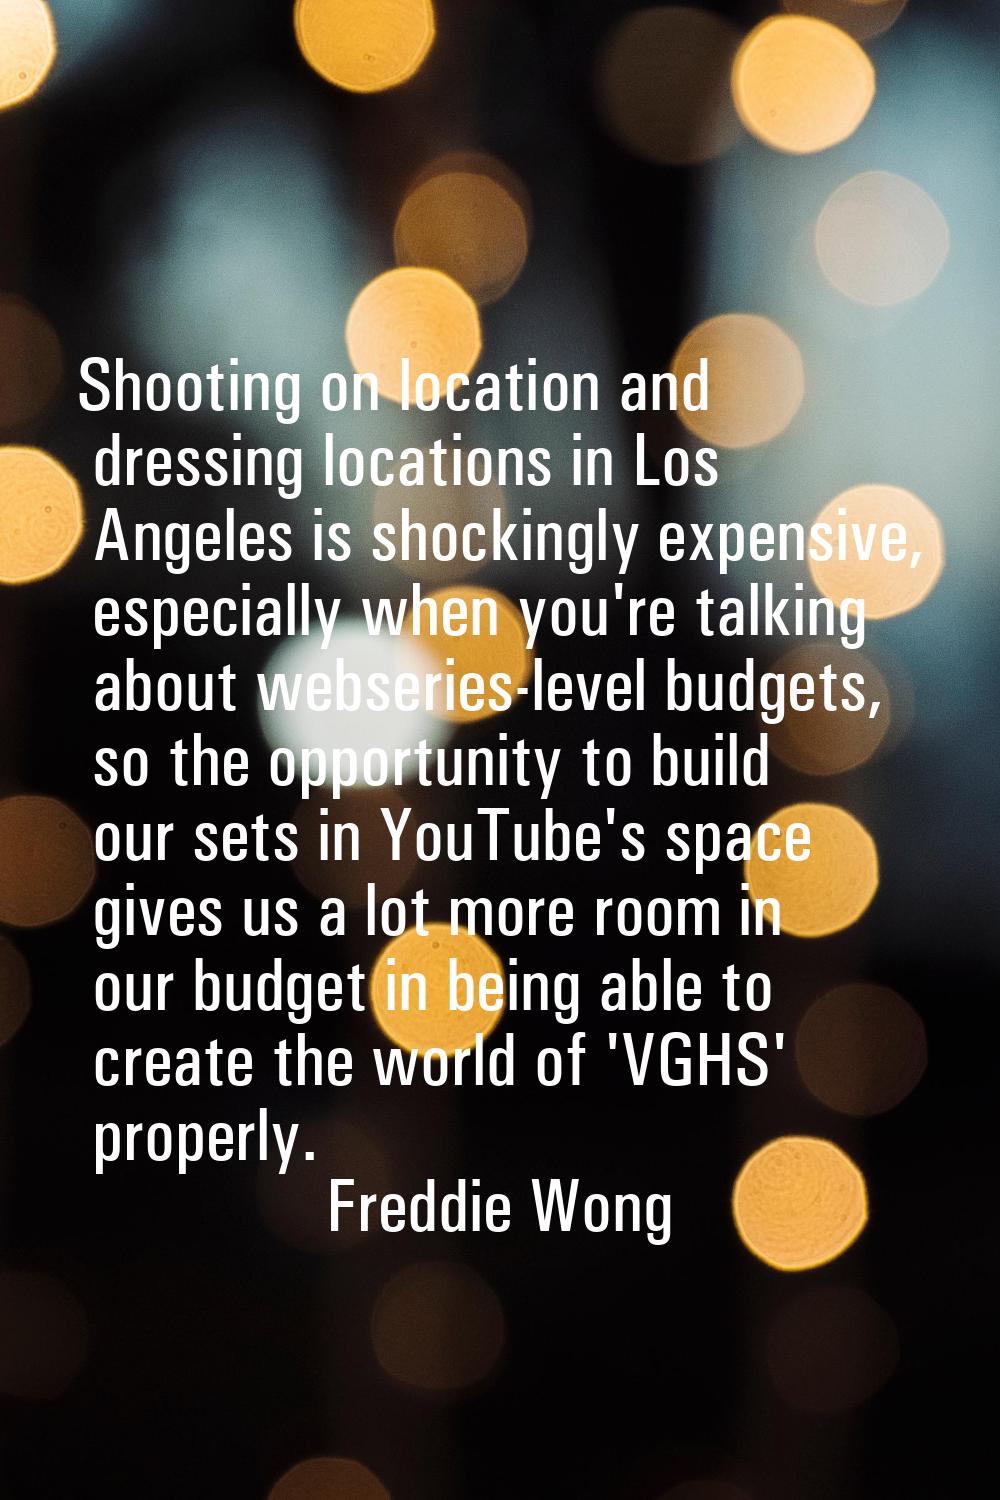 Shooting on location and dressing locations in Los Angeles is shockingly expensive, especially when